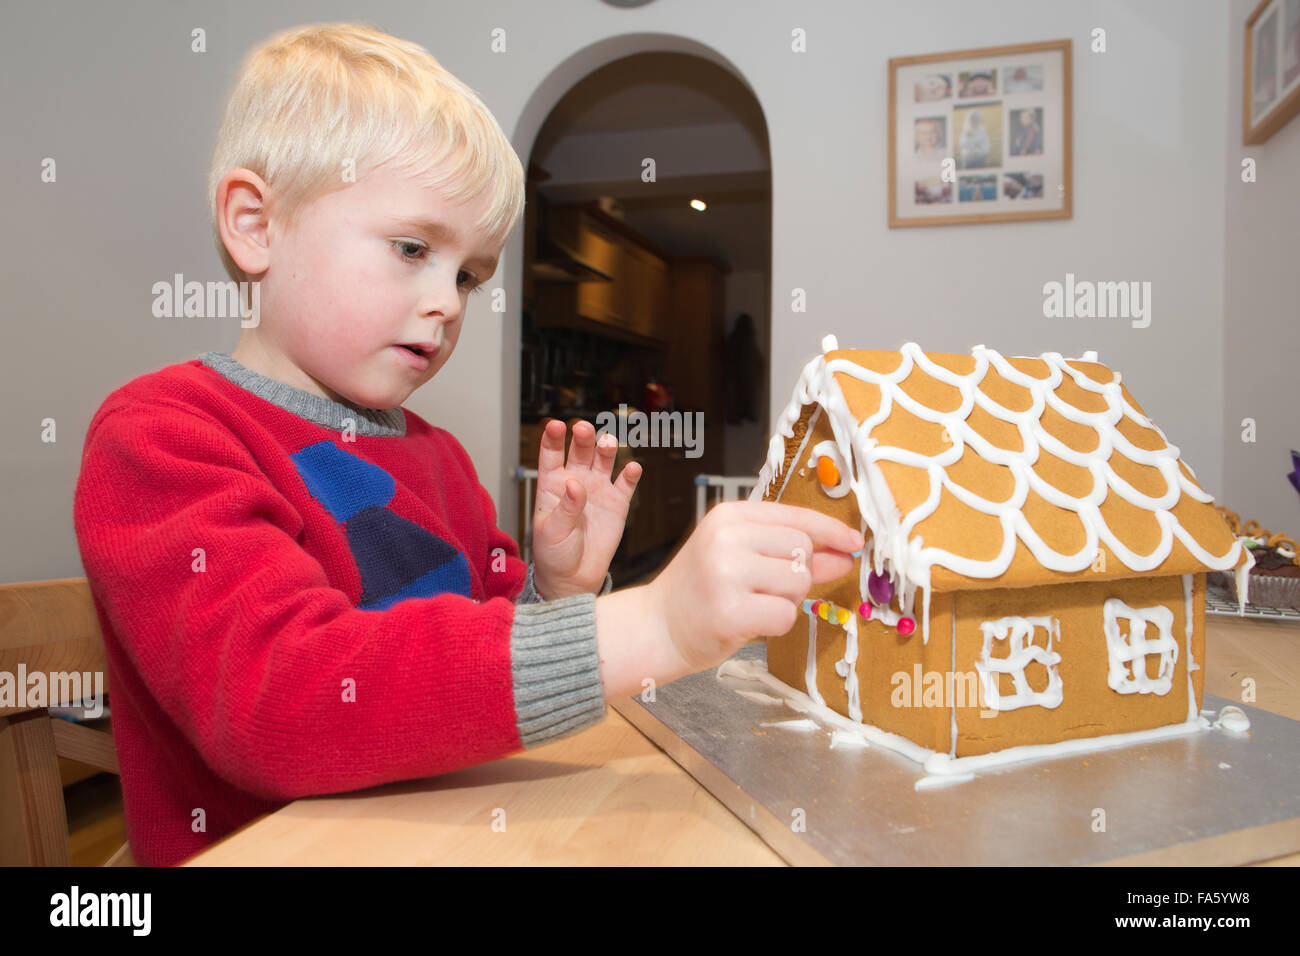 5 year old boy building a Gingerbread house made of gingerbread ahead of the Christmas festivities, UK Stock Photo